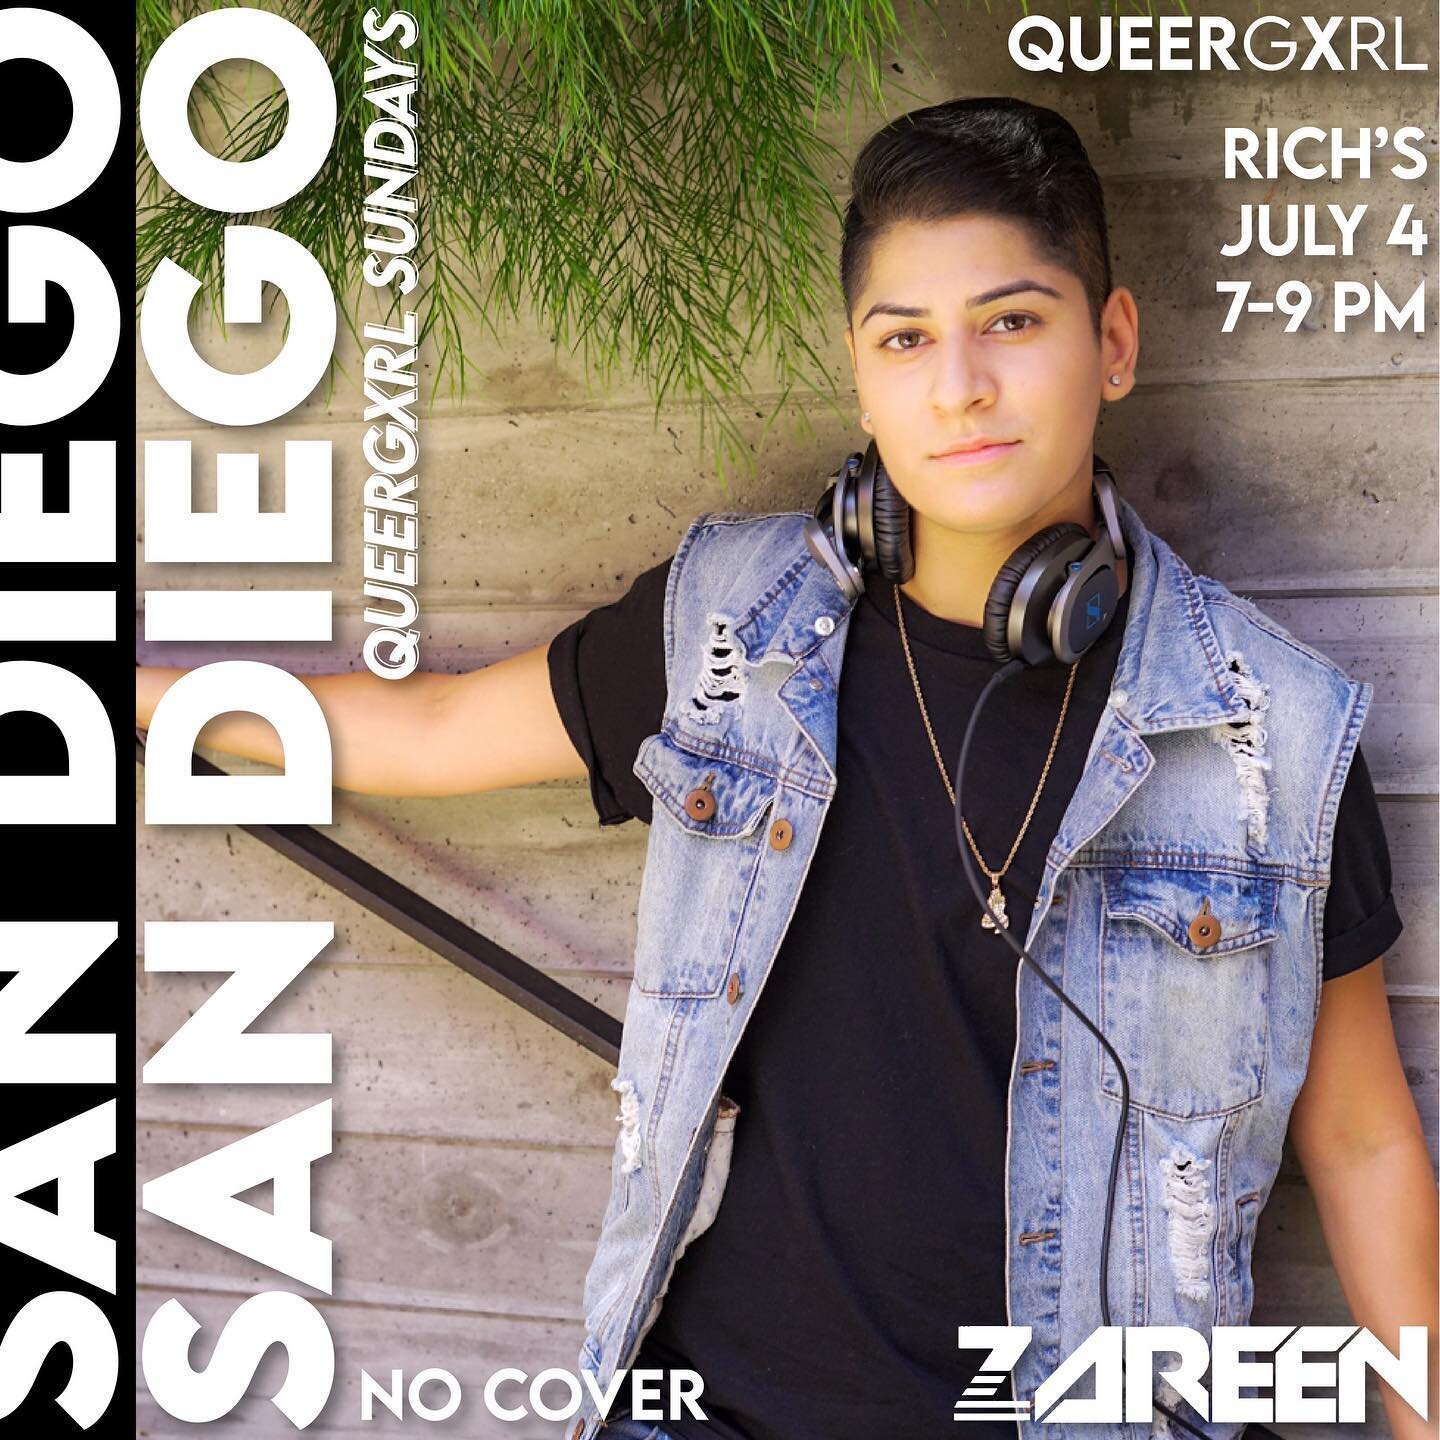 @queergxrlevents is back and throwing a weekly party EVERY SUNDAY‼️🌈 can&rsquo;t wait to be back on the decks at @richssandiego.. sets also by @jaynegrayy @iamlotusbanks🔥 kicking off 4th of July at 7PM 🙌🏽

NO COVER with registration link (in bio)